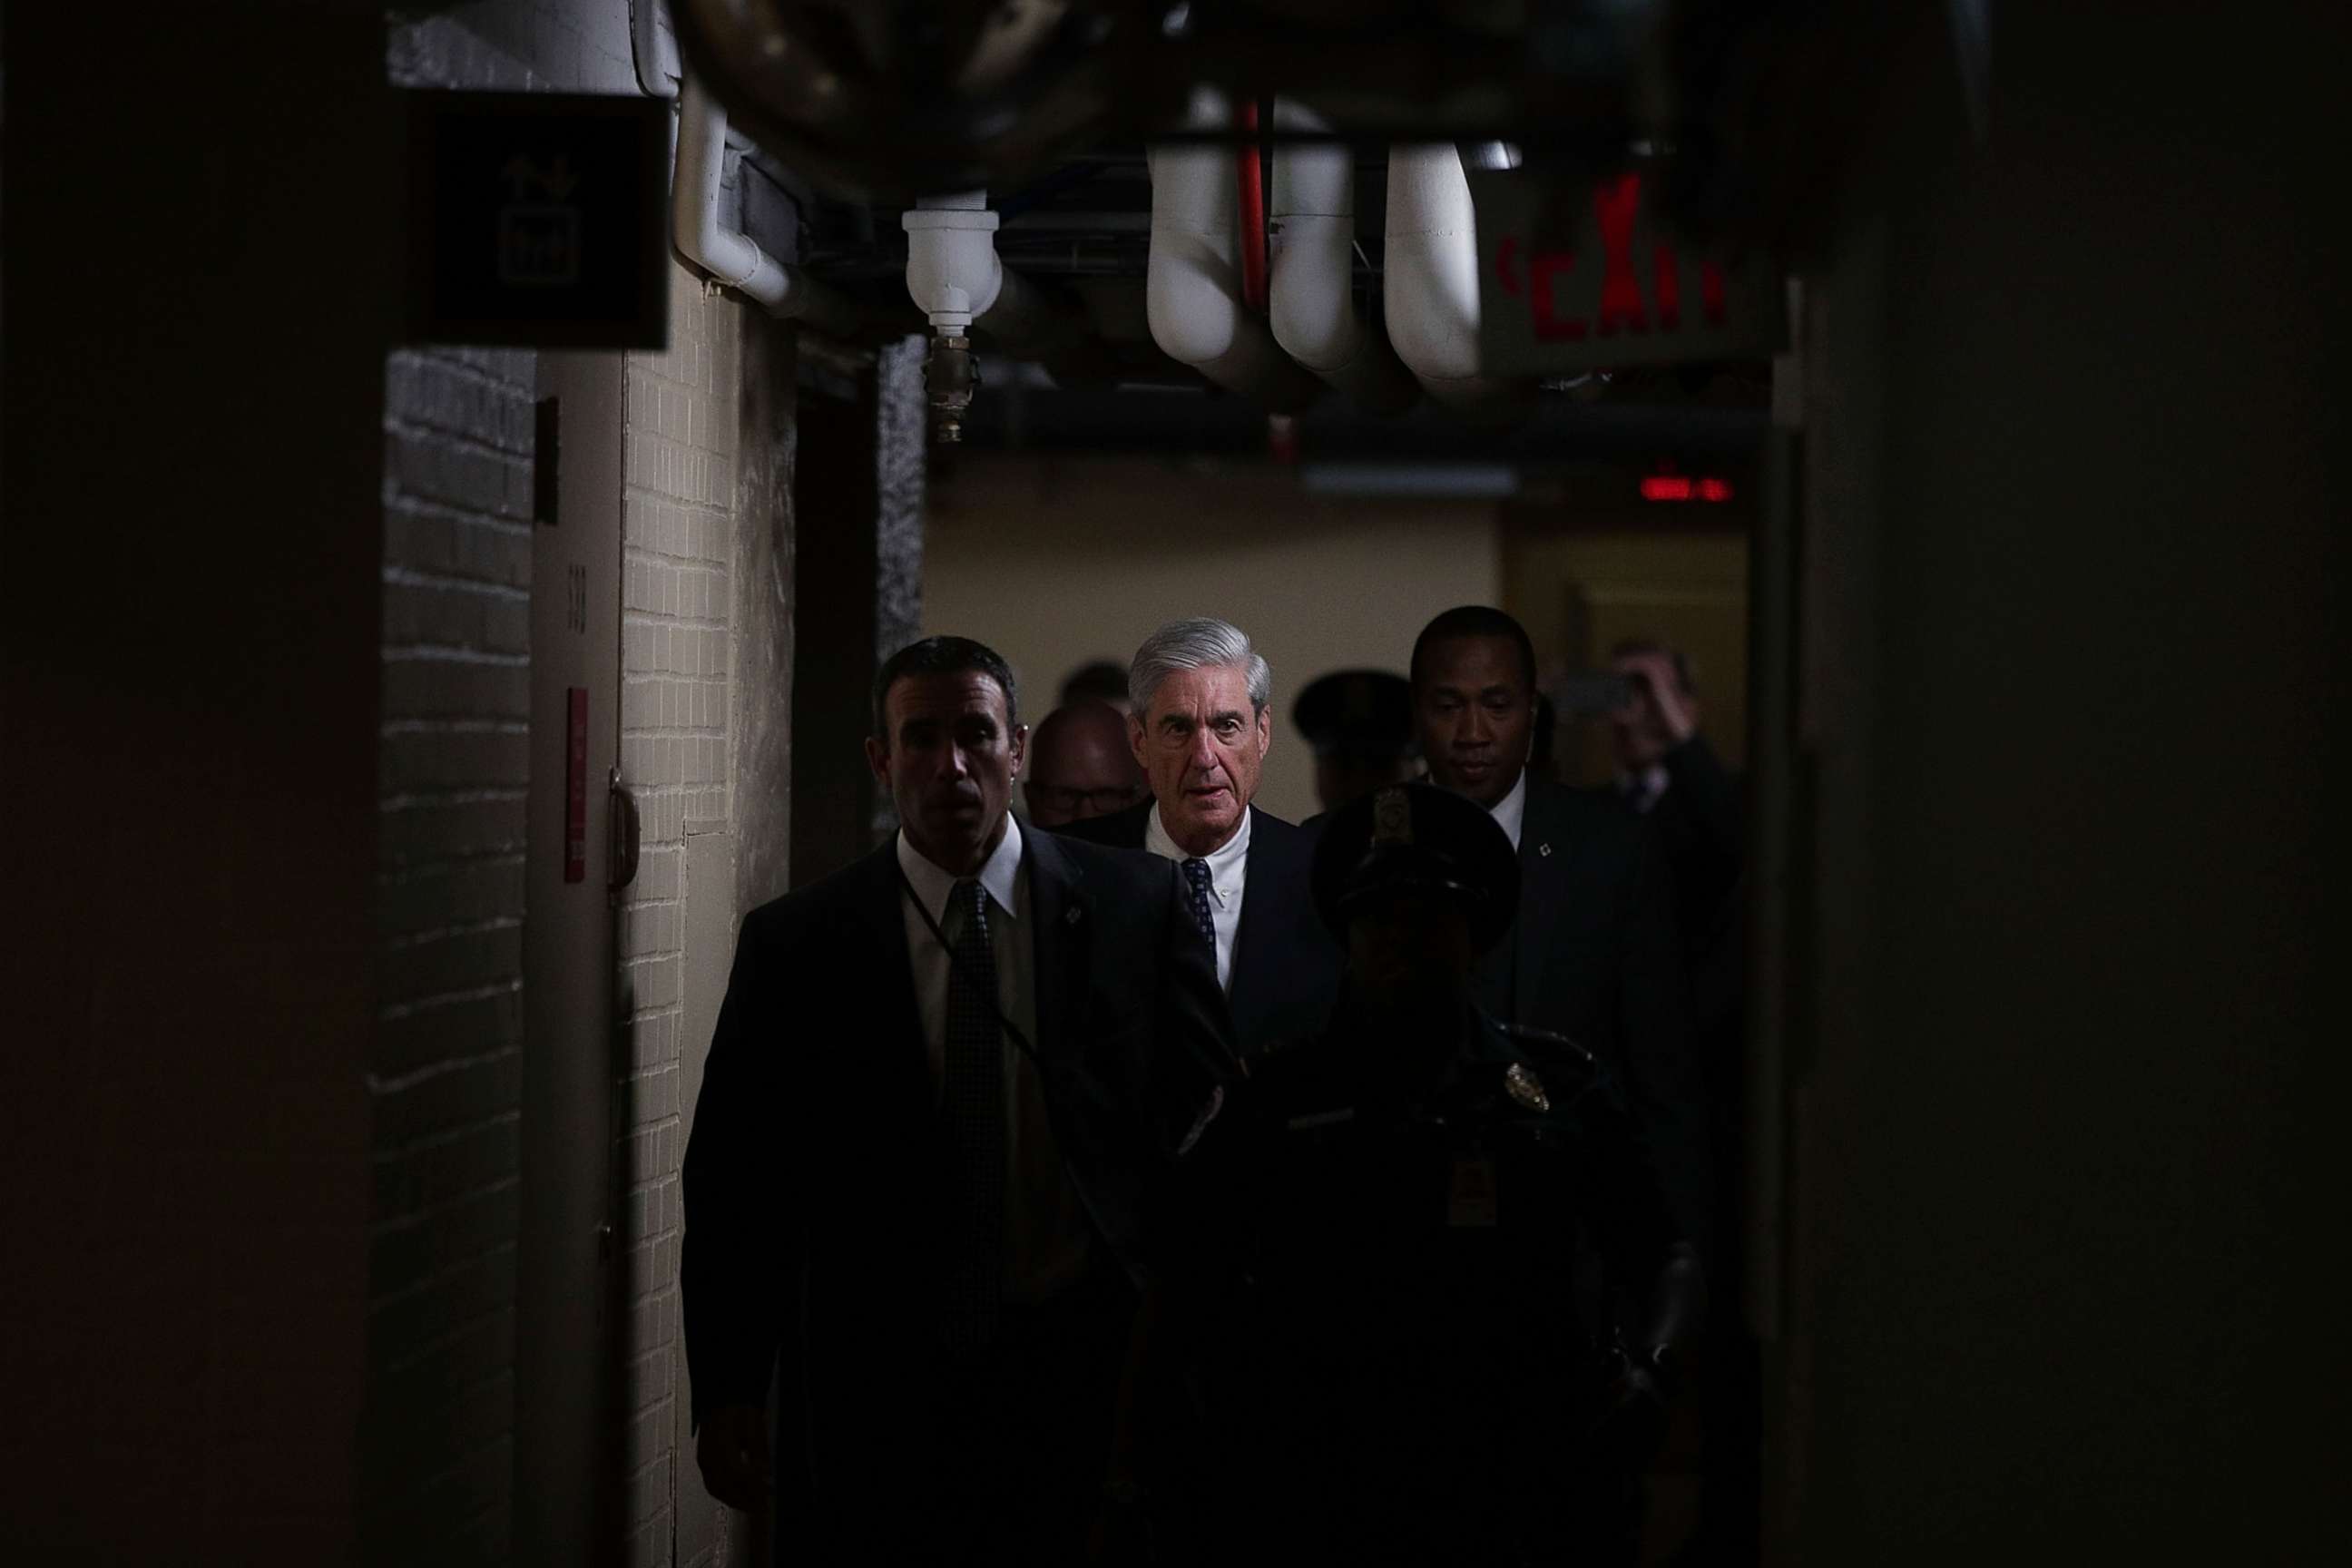 PHOTO: In this June 21, 2017, file photo, special counsel Robert Mueller, center, leaves after a closed meeting with members of the Senate Judiciary Committee at the Capitol in Washington, D.C.